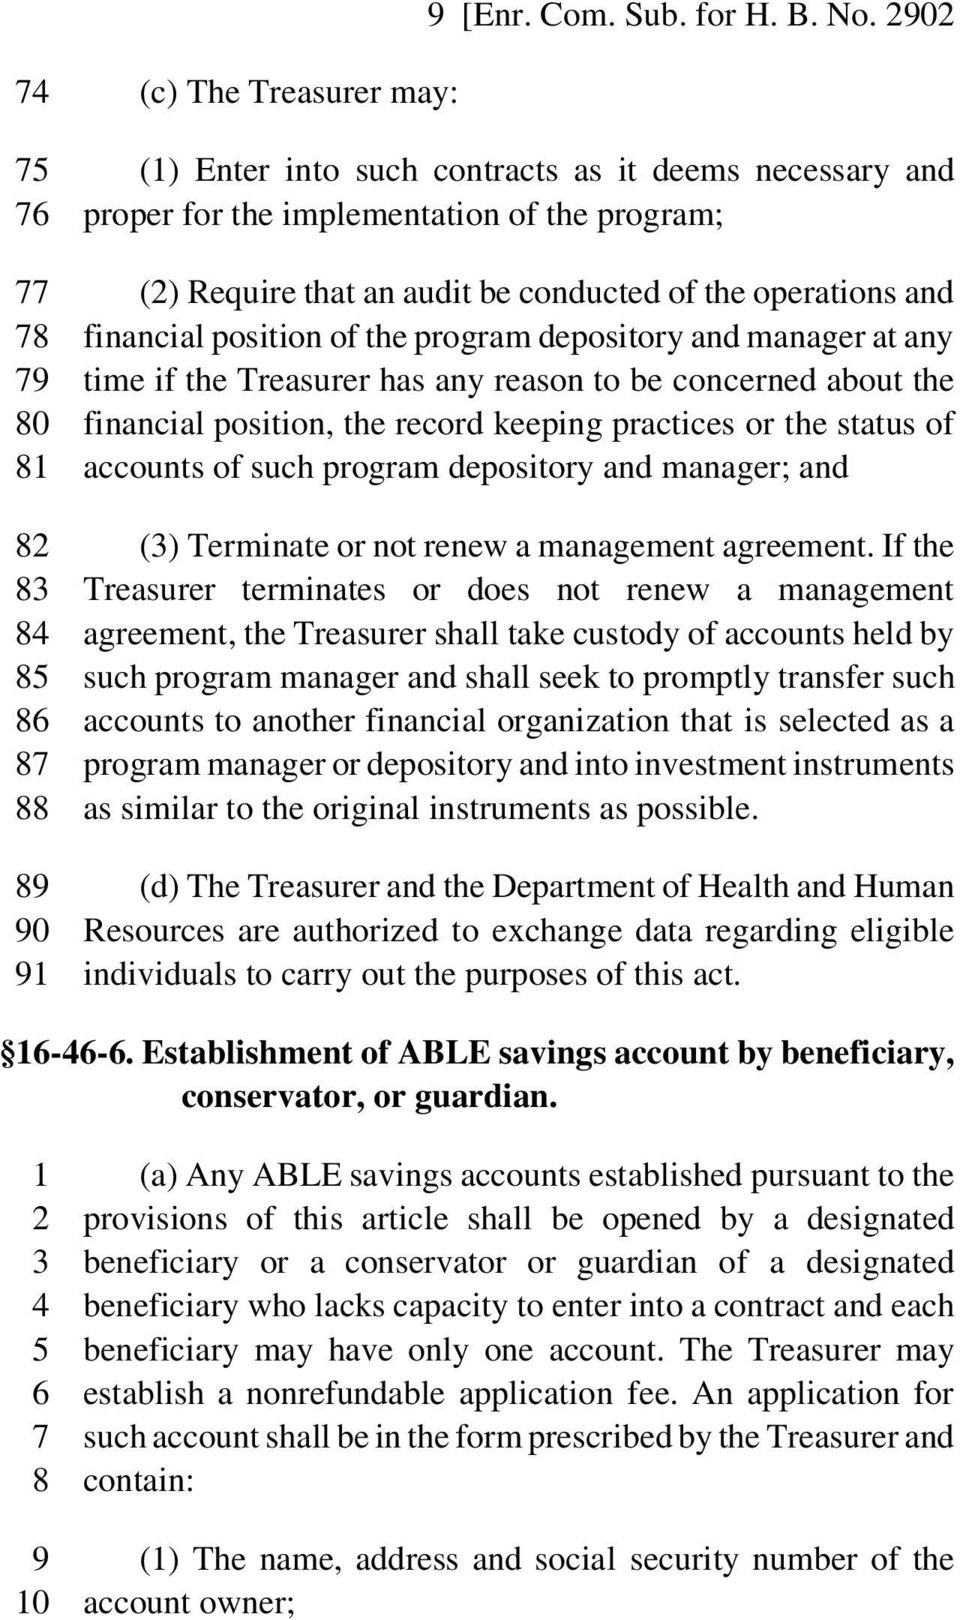 of the program depository and manager at any 79 time if the Treasurer has any reason to be concerned about the 80 financial position, the record keeping practices or the status of 81 accounts of such